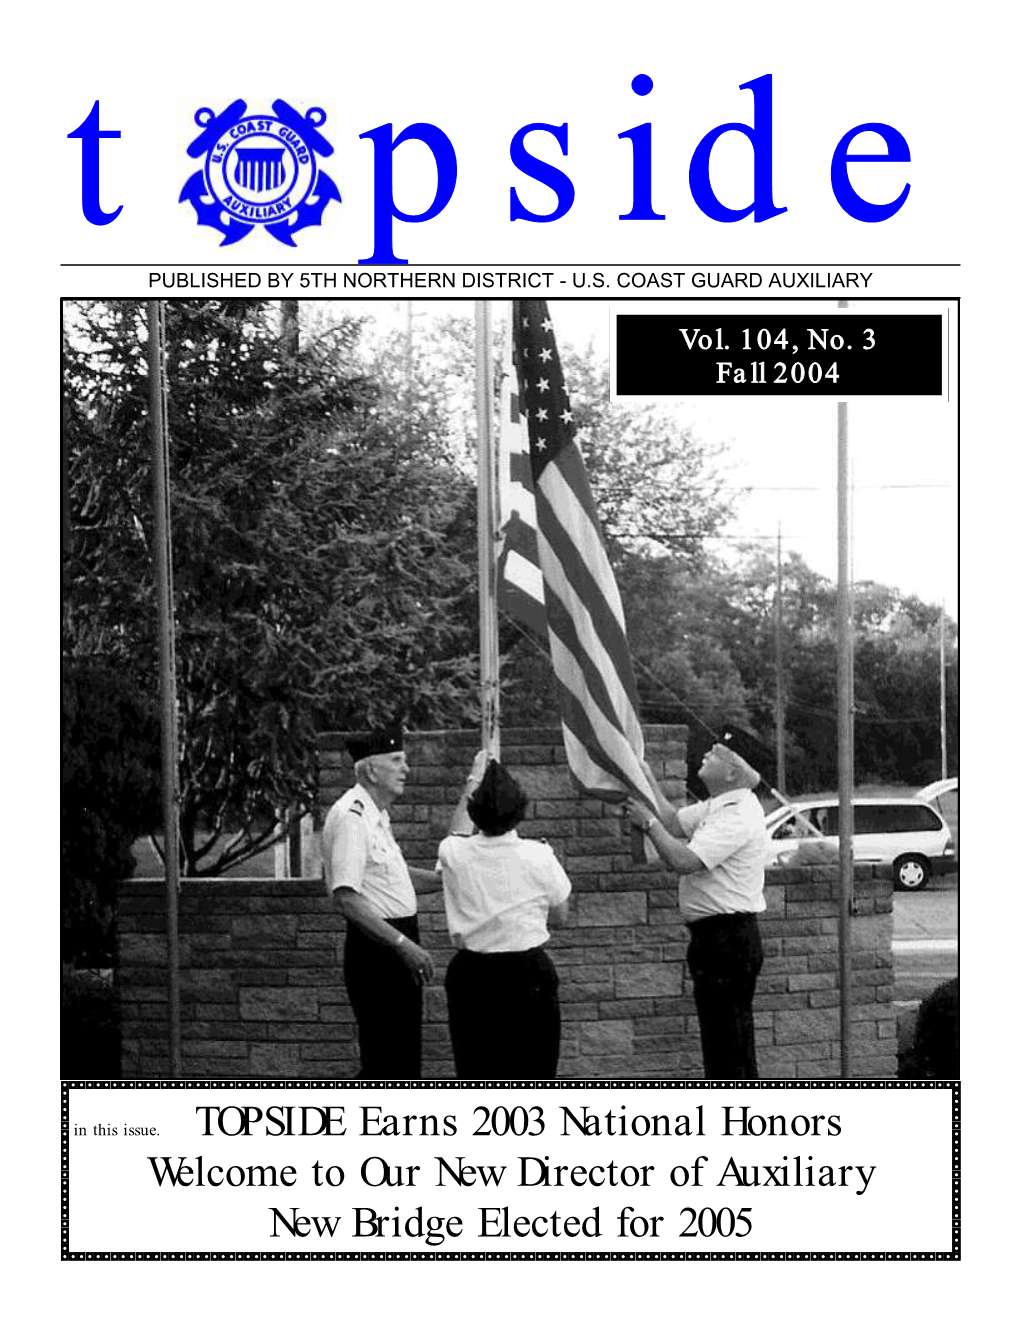 In This Issue. TOPSIDE Earns 2003 National Honors Welcome to Our New Director of Auxiliary New Bridge Elected for 2005 DIVISION CAPTAINS 2004